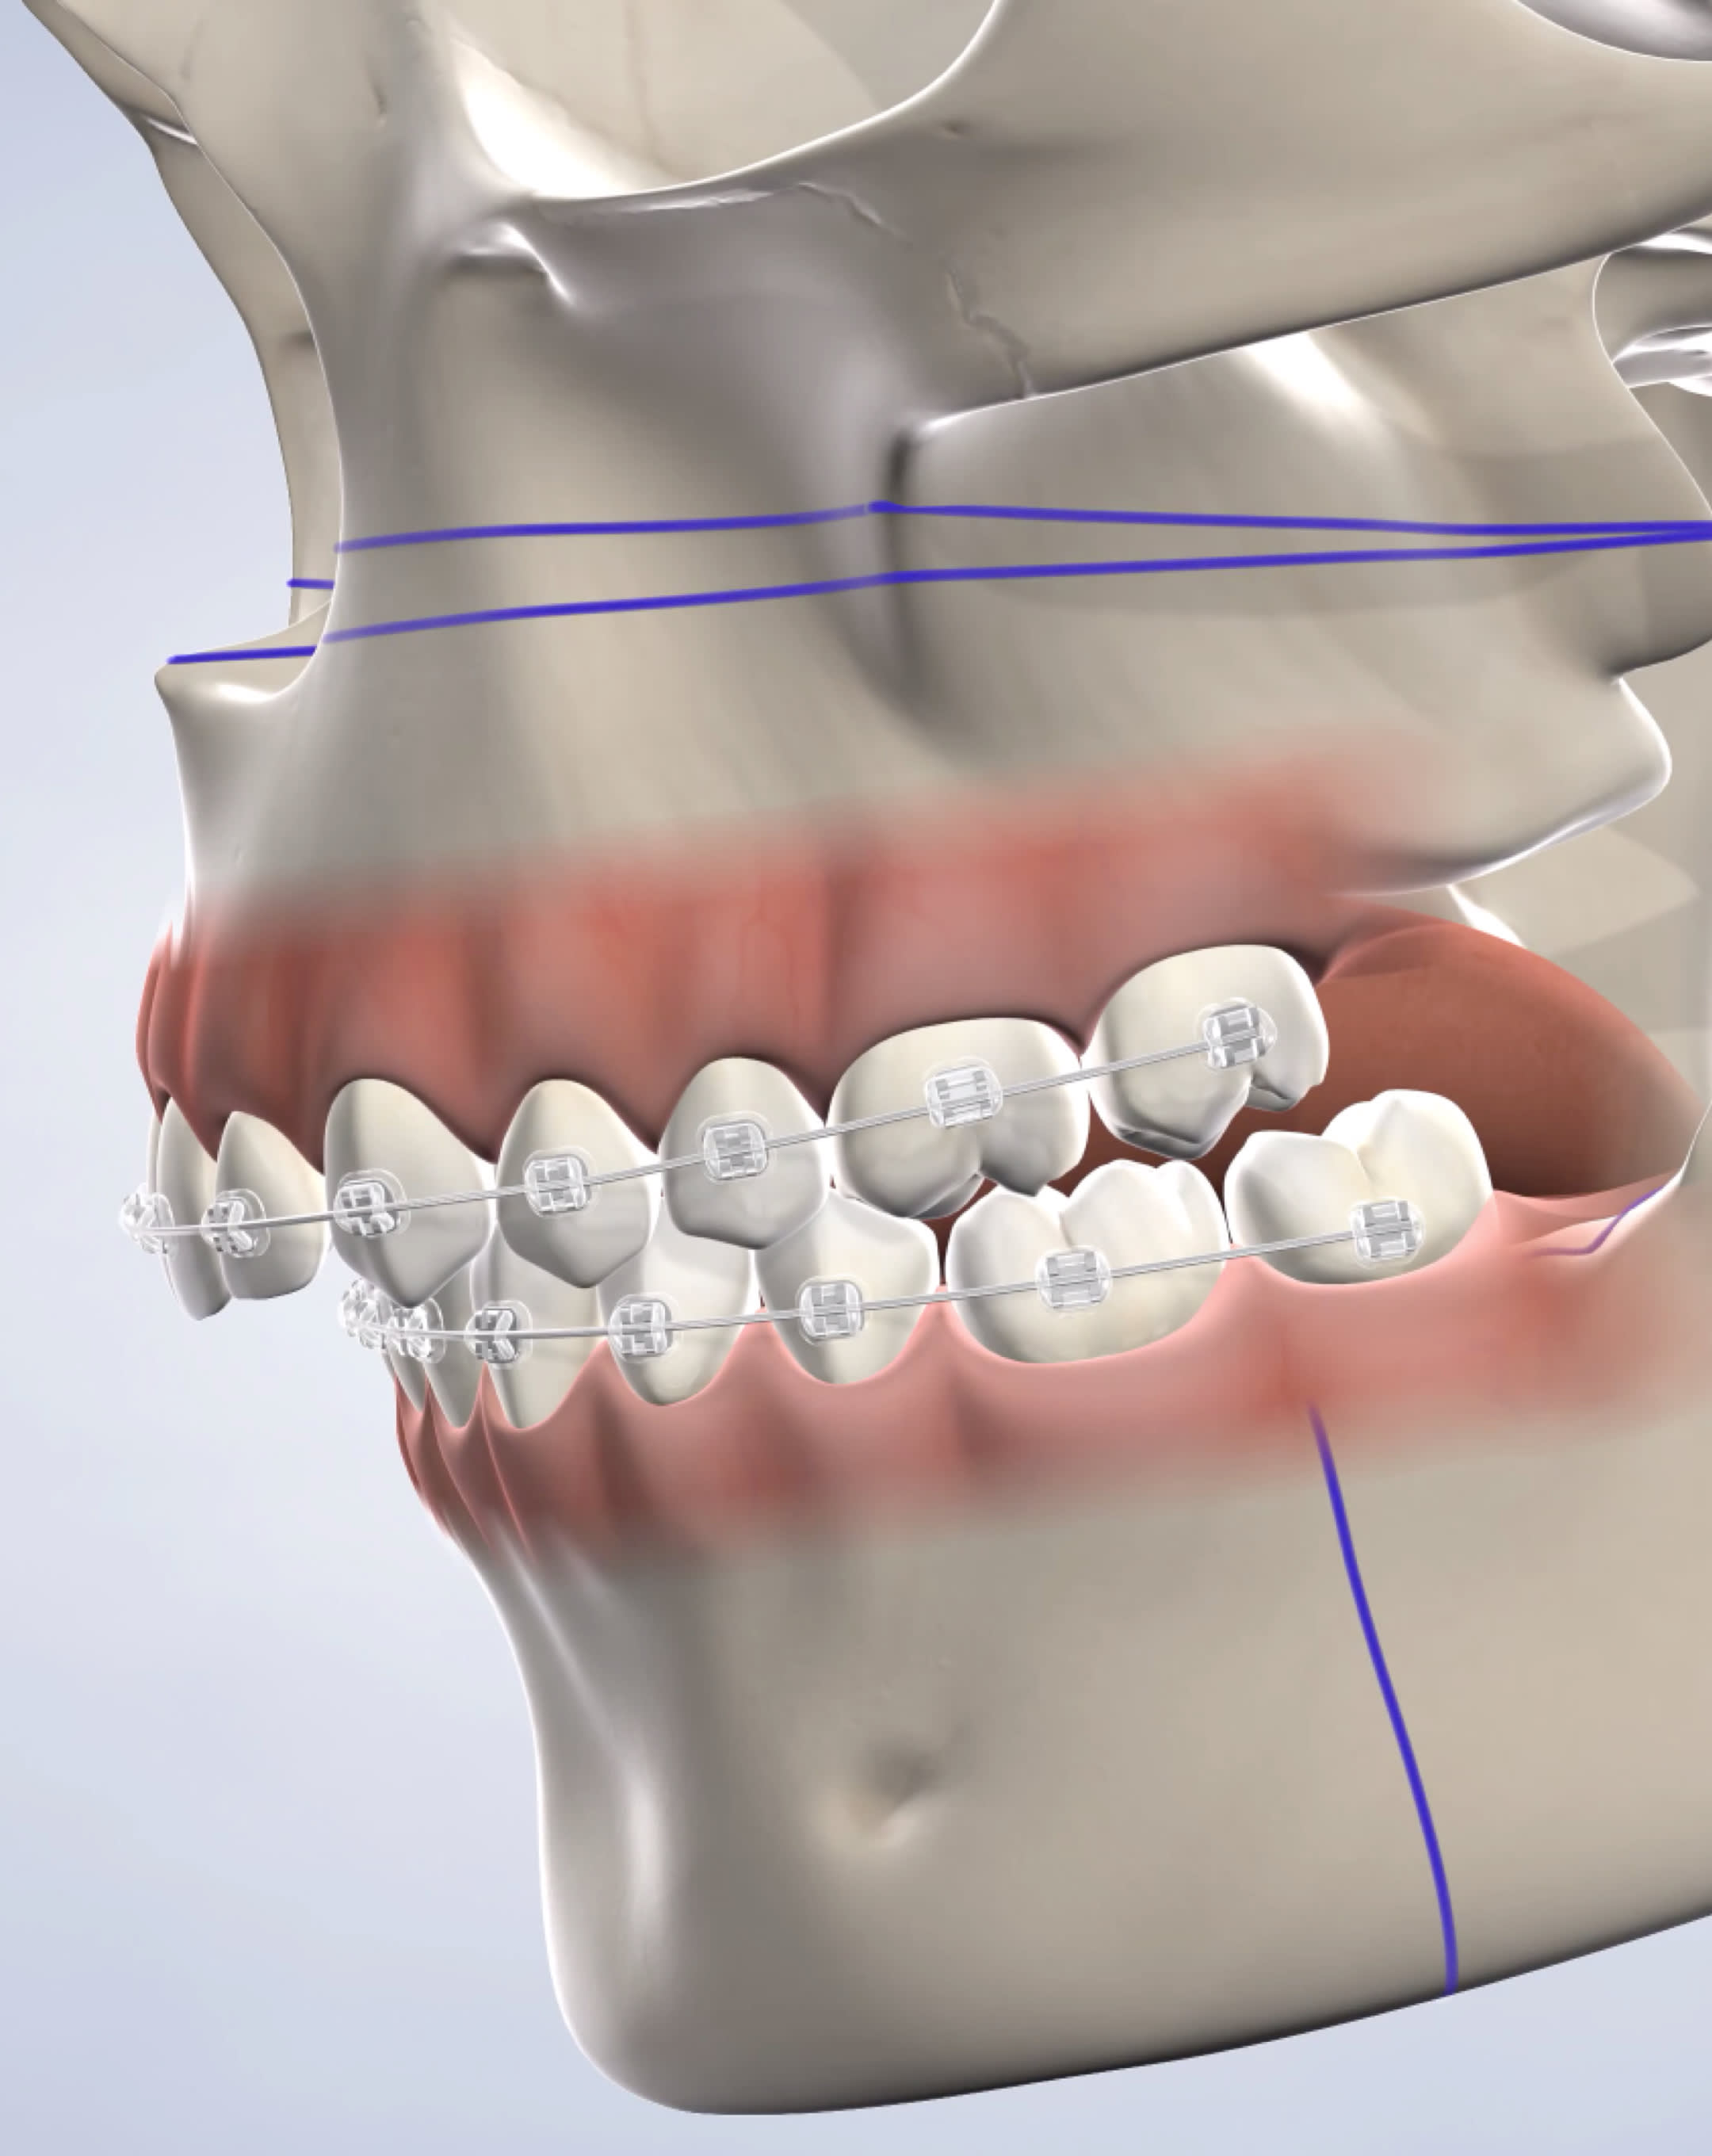 Jaw surgery in Houston, TX